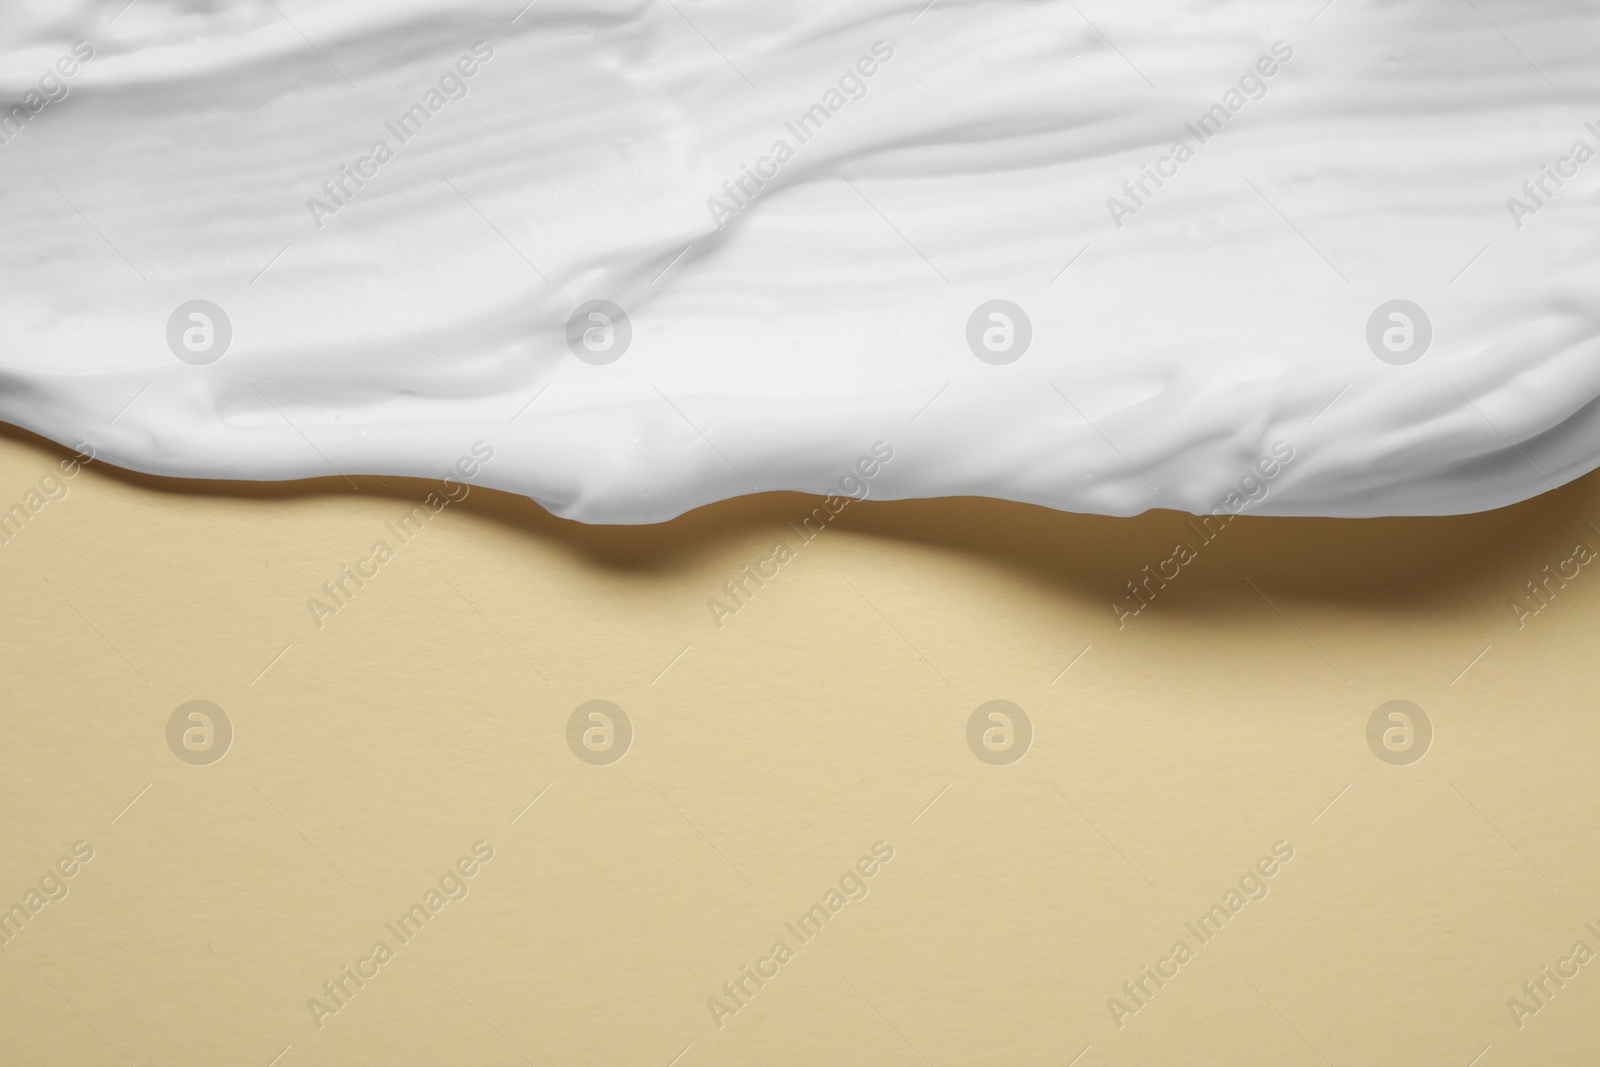 Photo of Sample of shaving foam on beige background, top view. Space for text